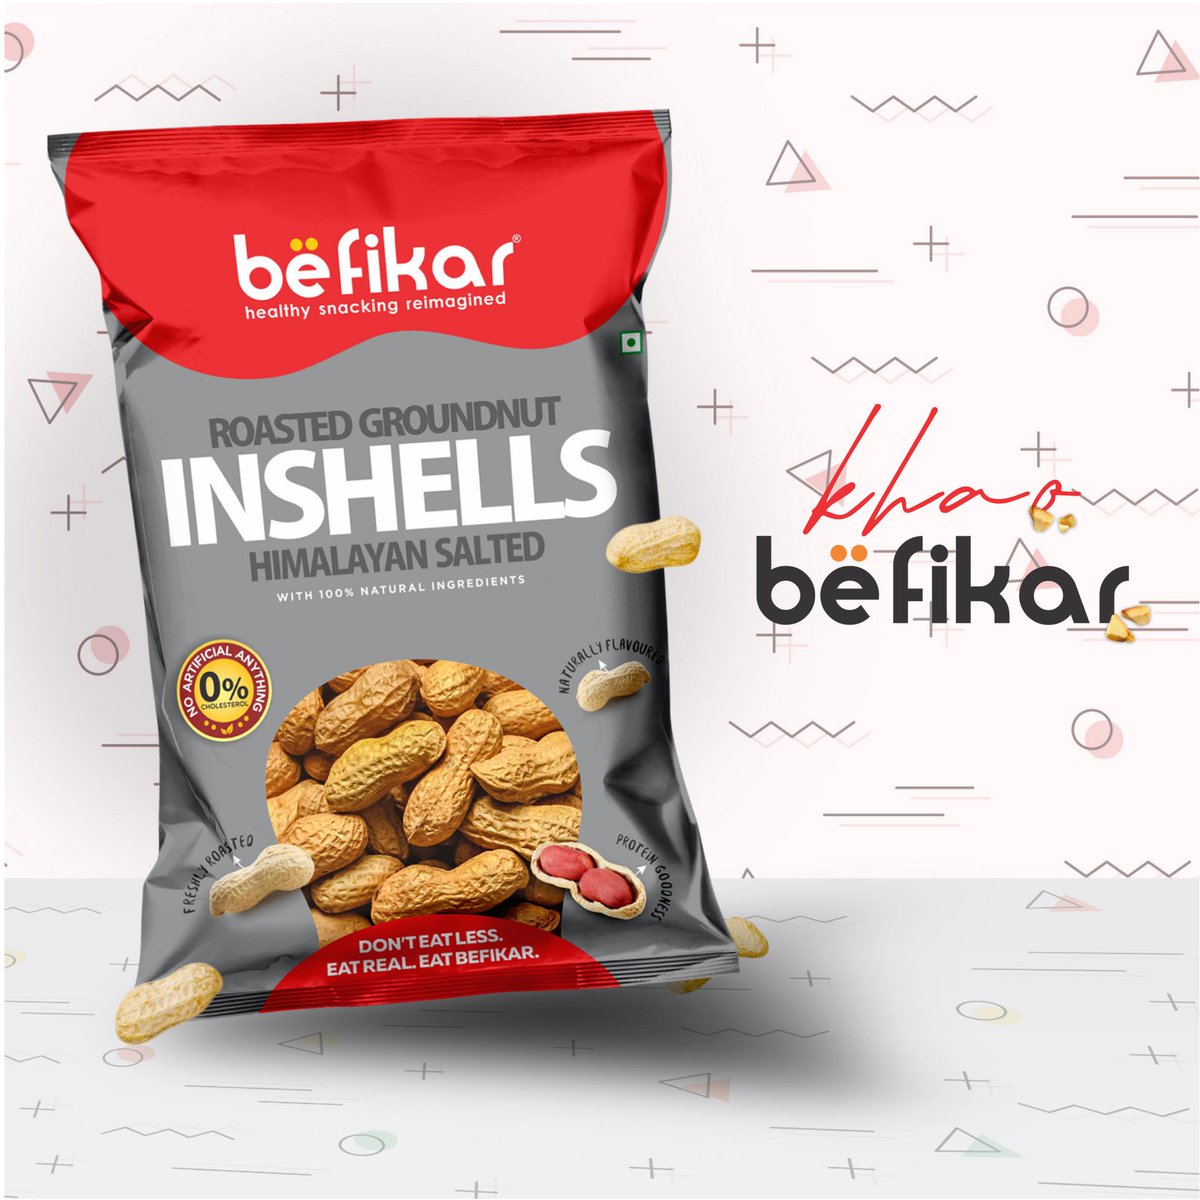 Bringing back the traditional peanut inshells. Now available in flavours.

#snacks #snack #foodporn #food #foodie #instafood #yummy #snackfood #delicious #lifestyle #nutritious #readytoeat #savetime #healthysnacks #snacktime #hungry #teatime #homemadesnacks #tasty  #eatbefikar